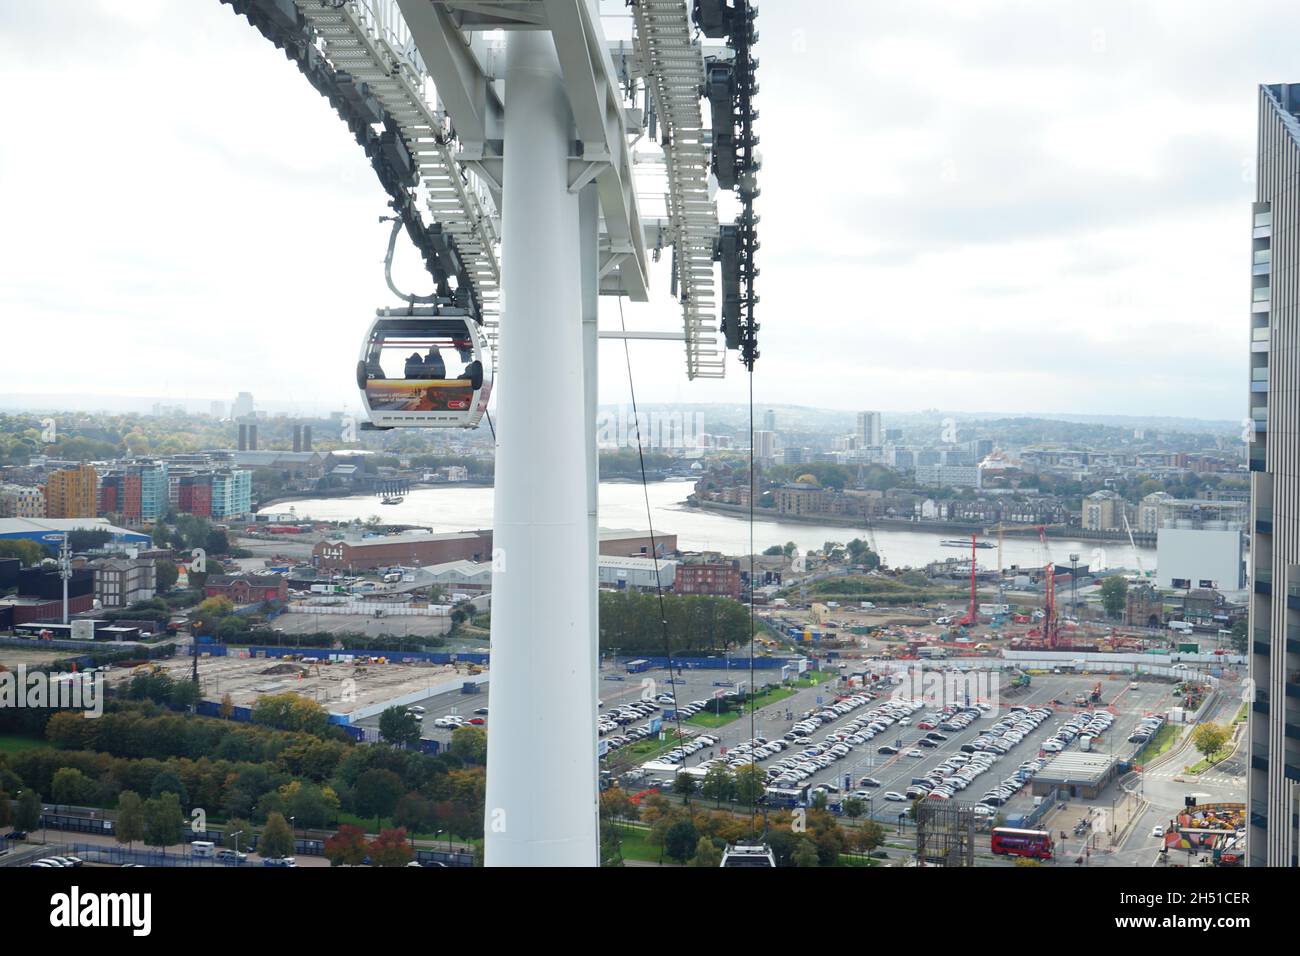 Emirates cable car zip lining over London River Thames in he U.K, transporting passengers and tourists from the O2 Centre Stock Photo